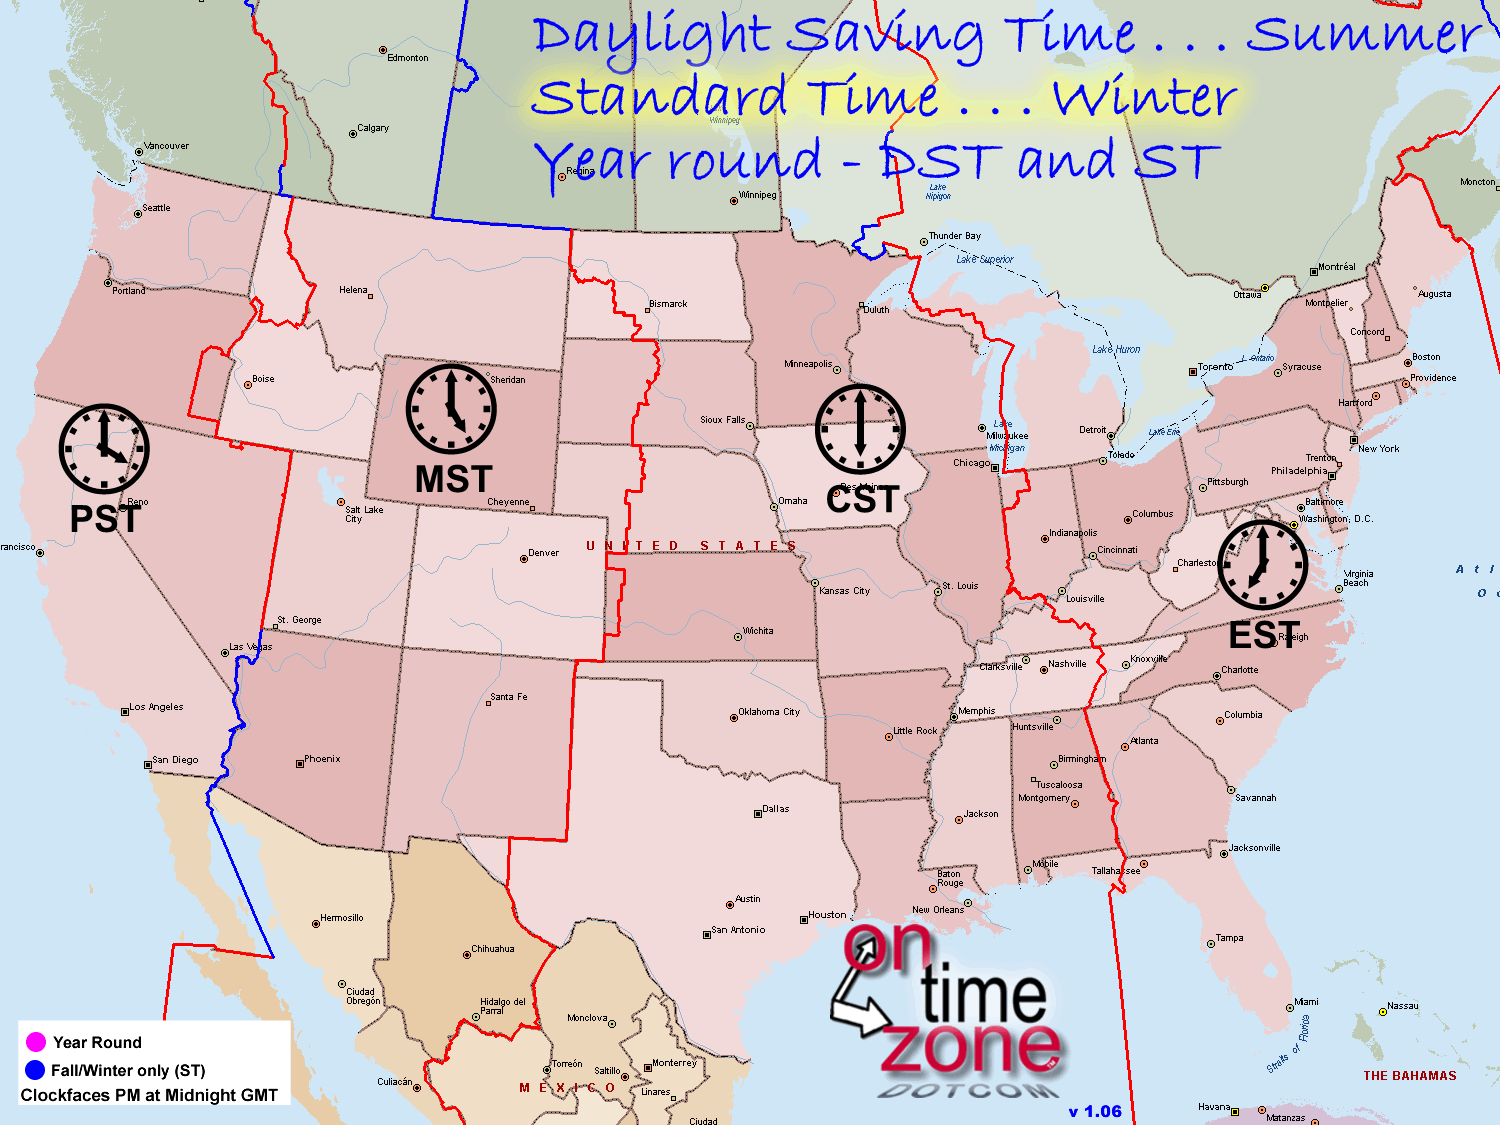 different time zones in usa